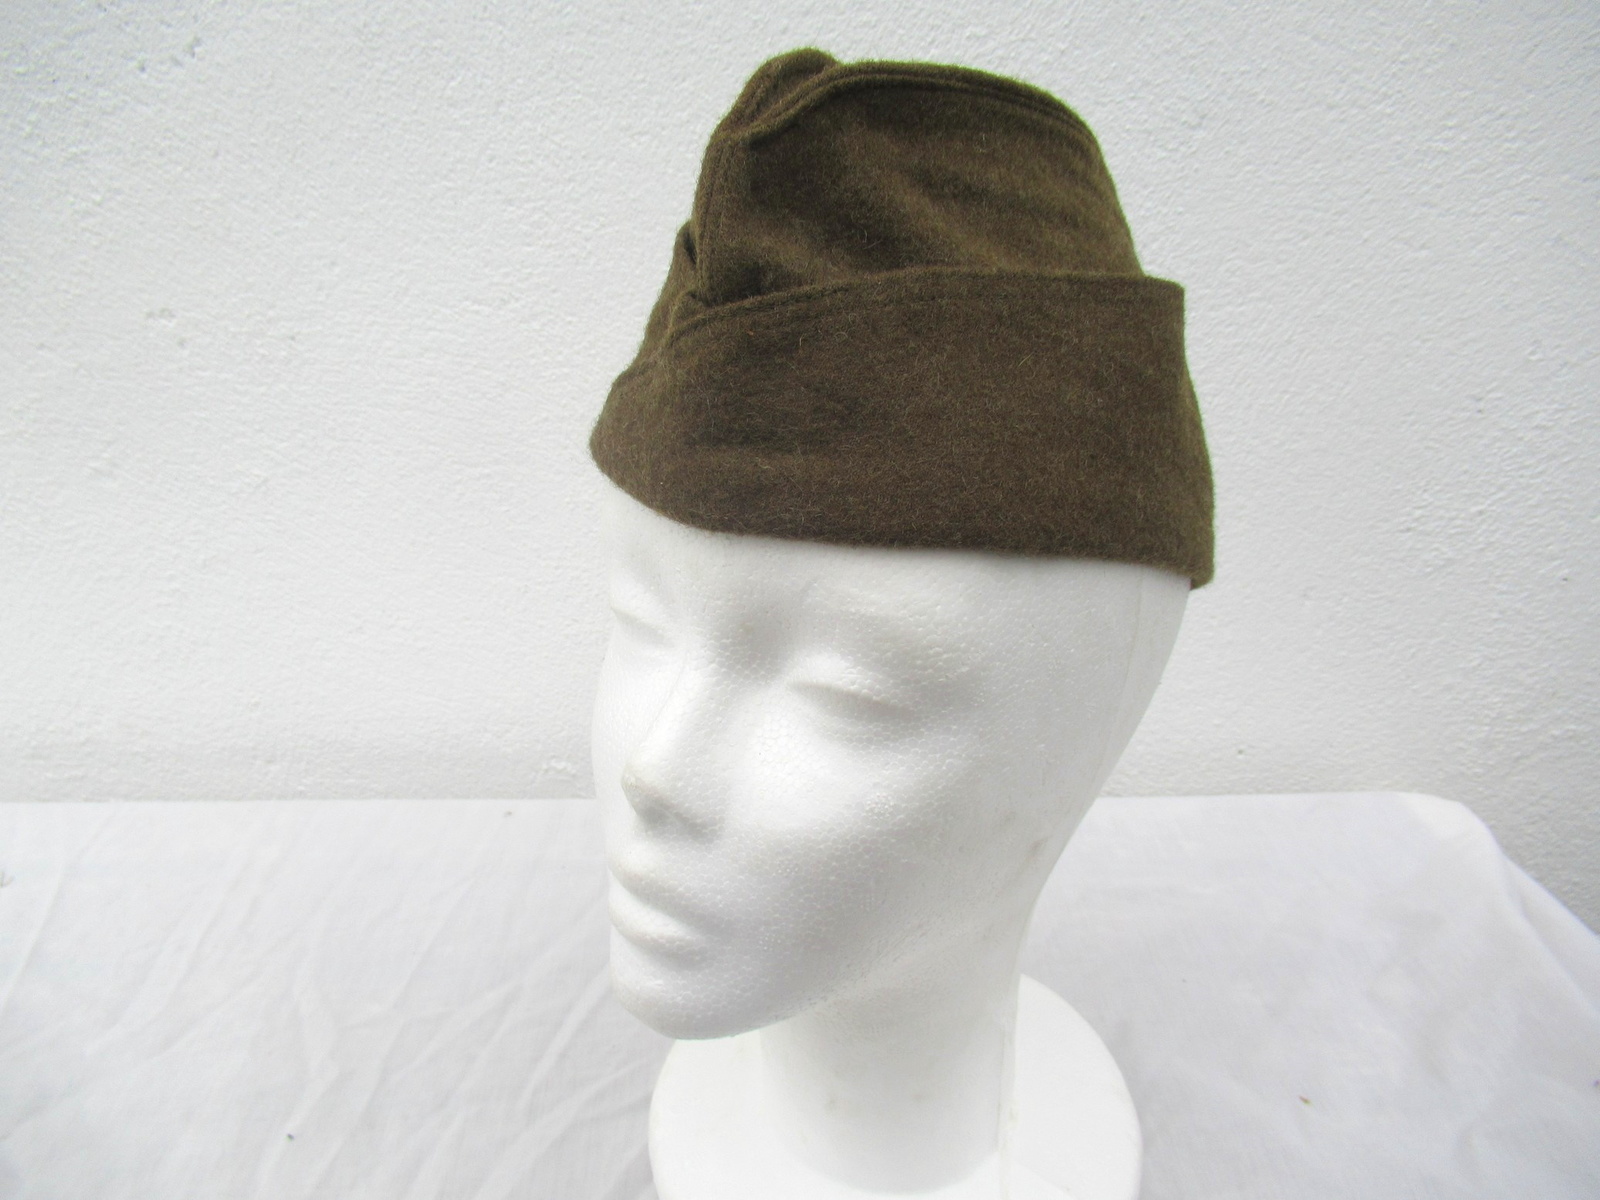 Vintage 1950s French army brown wool side cap military hat garrison forage m47 - $15.00 - $20.00